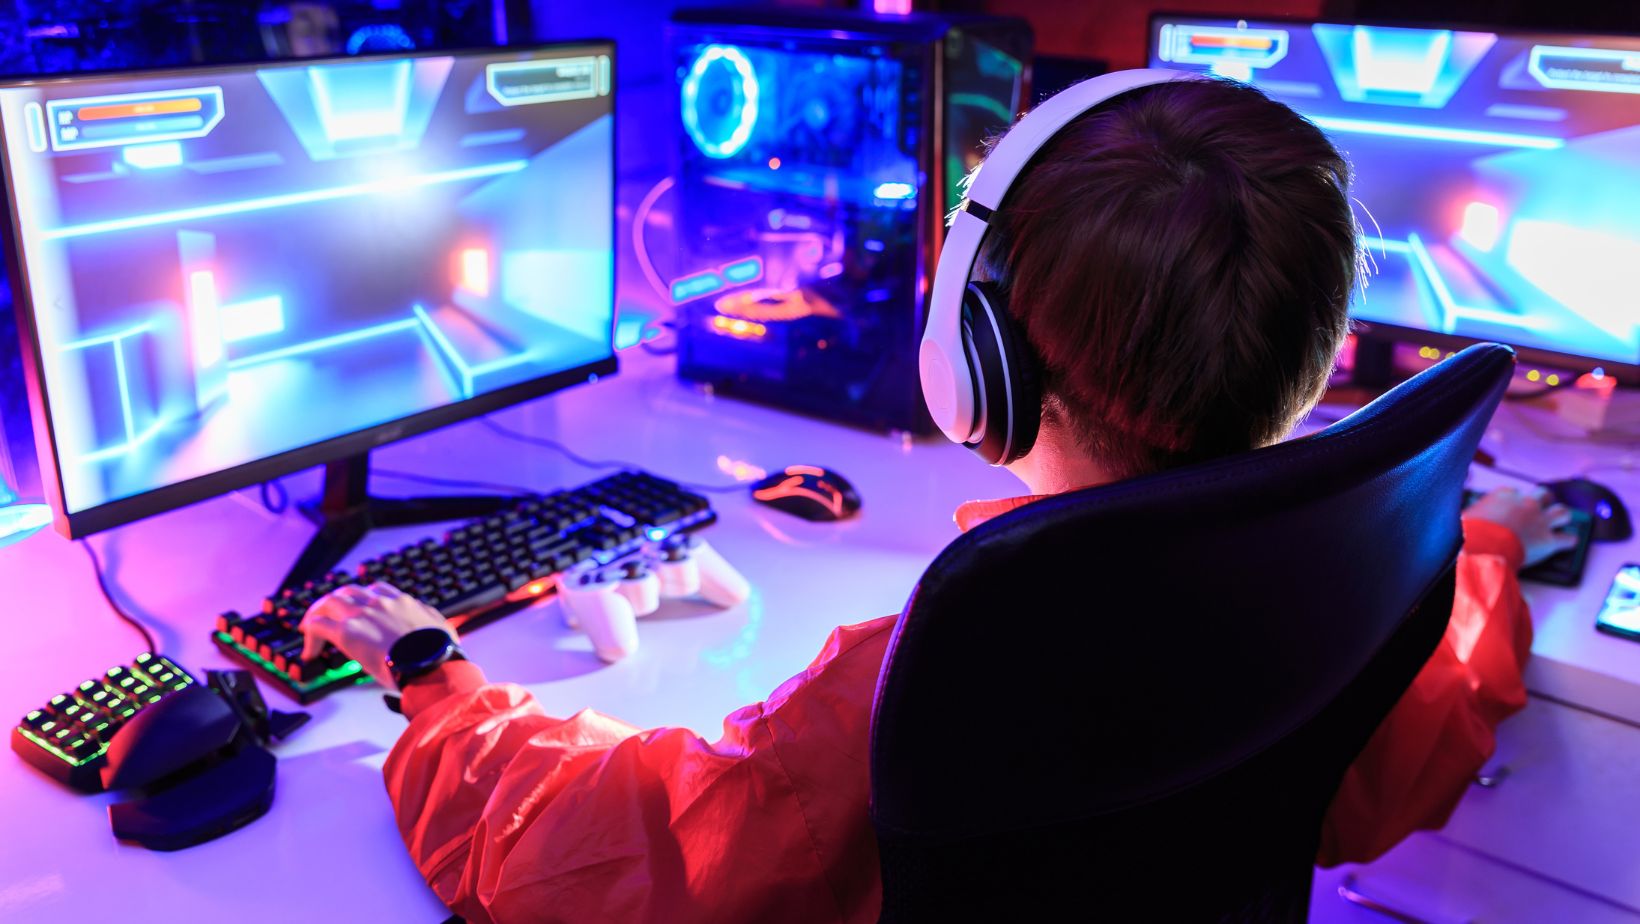 how can gamers protect themselves when playing online?